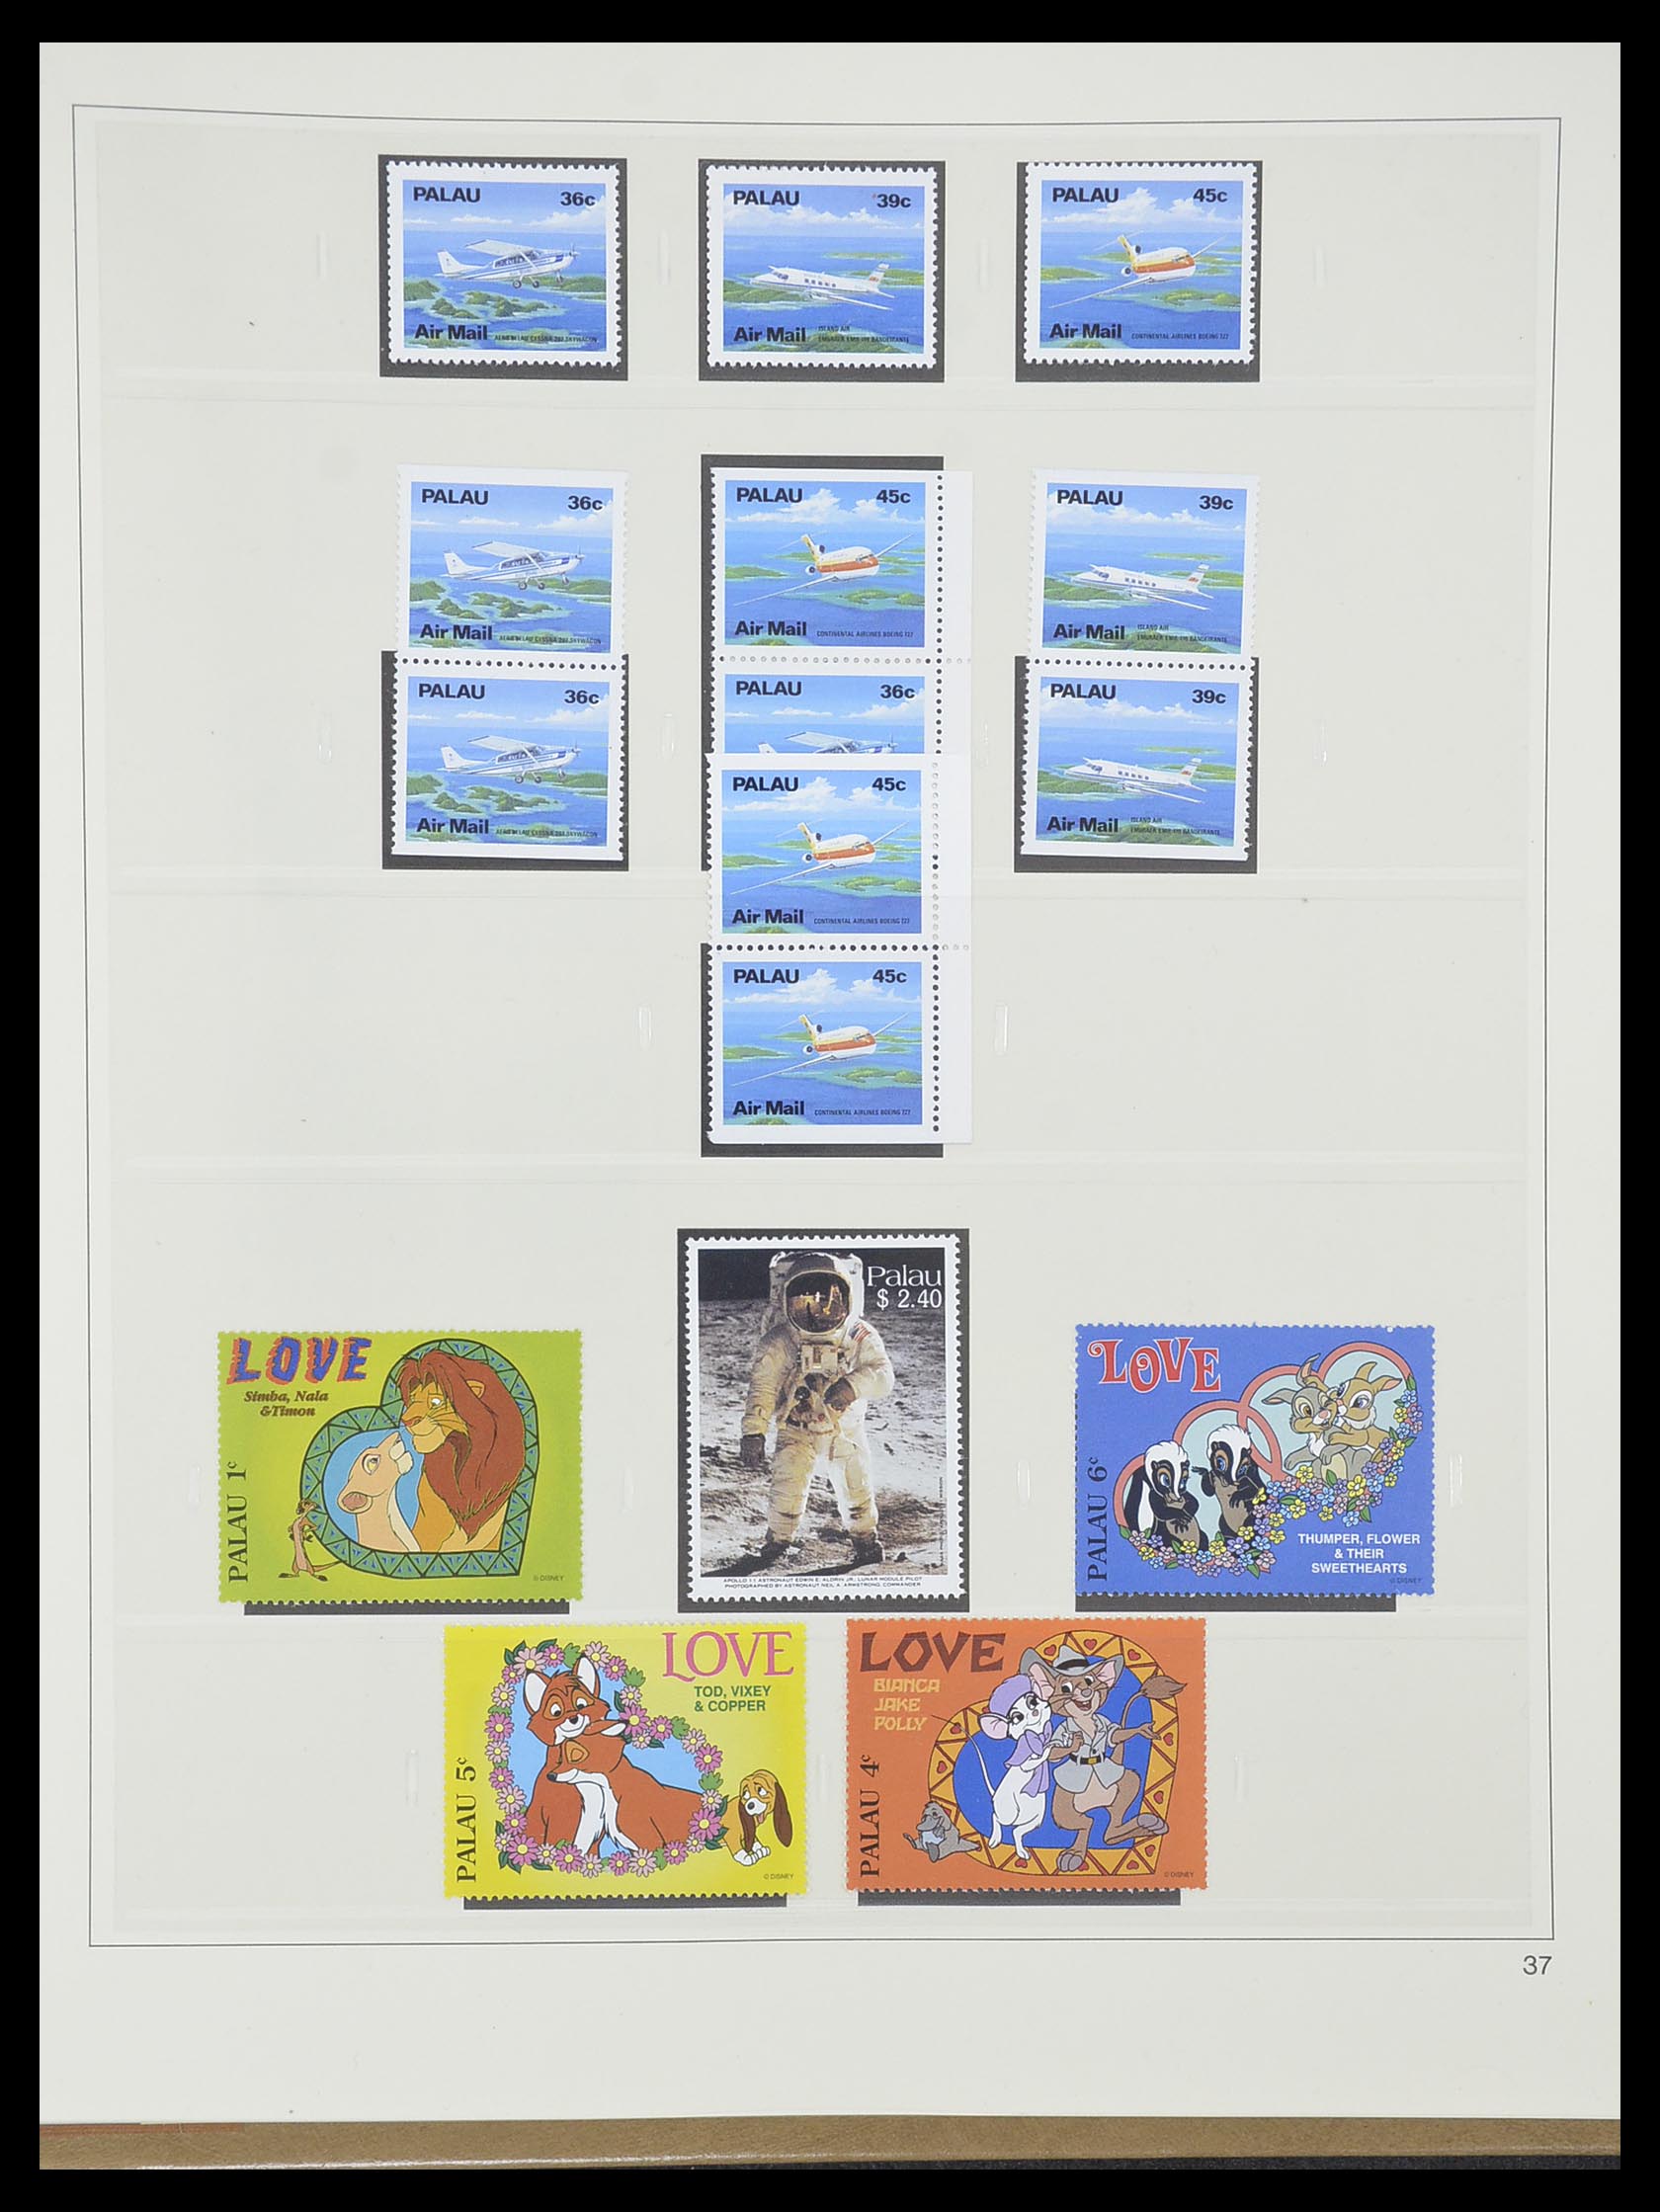 33852 038 - Stamp collection 33852 Palau 1983-1999.